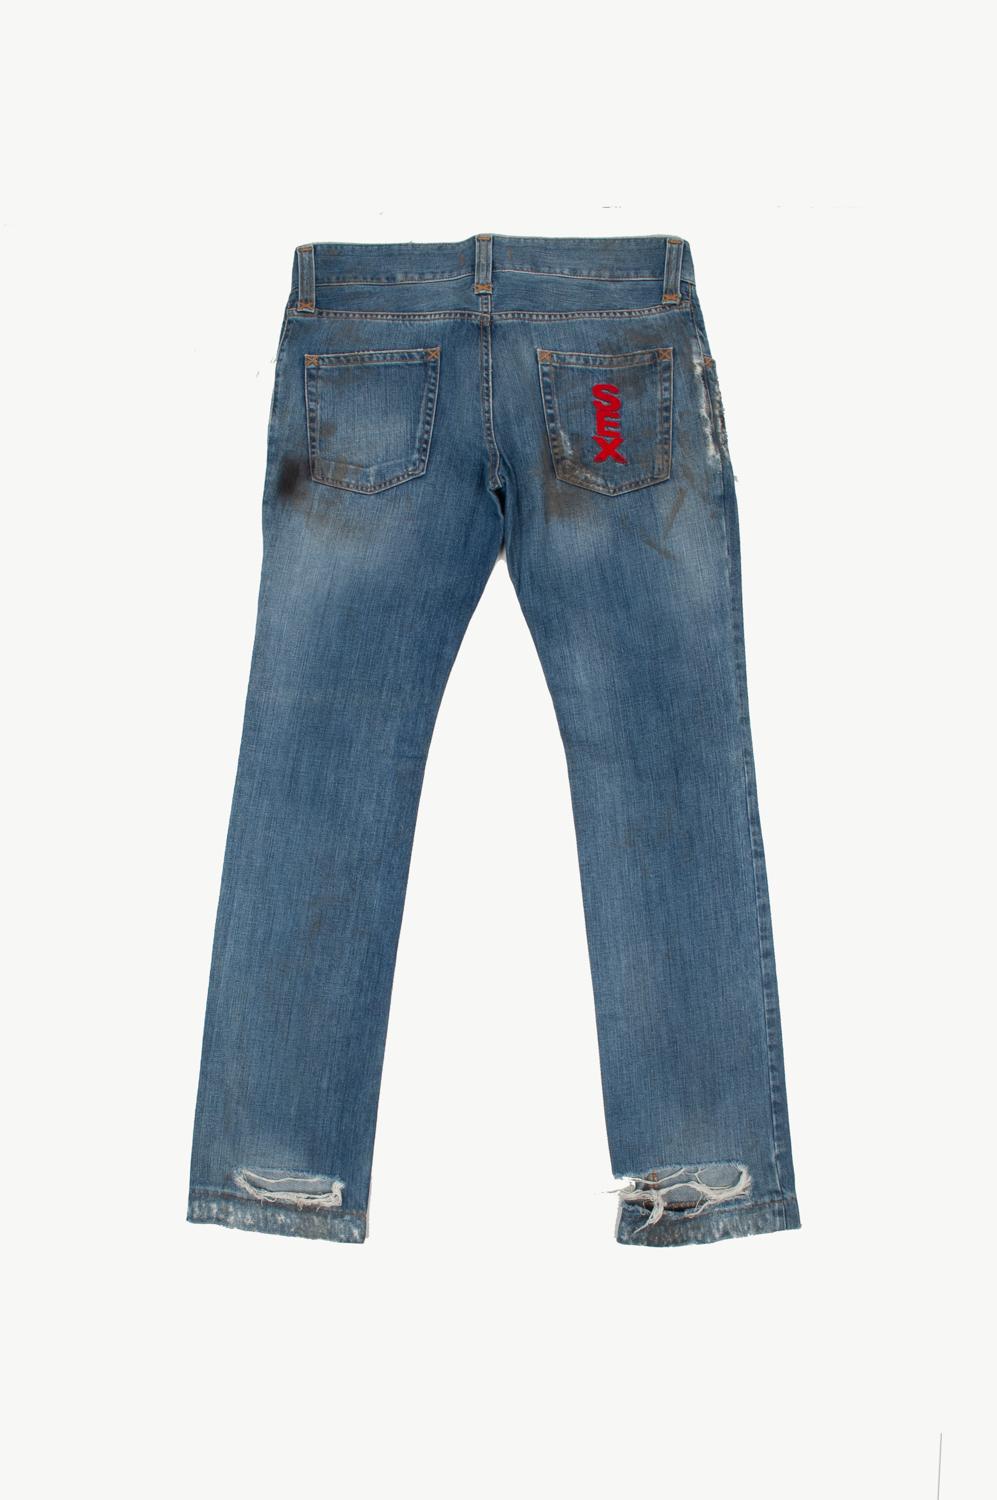 Dolce&Gabbana Sex Men Distressed Dirty Ripped Design Jeans Size ITA 50  For Sale 3